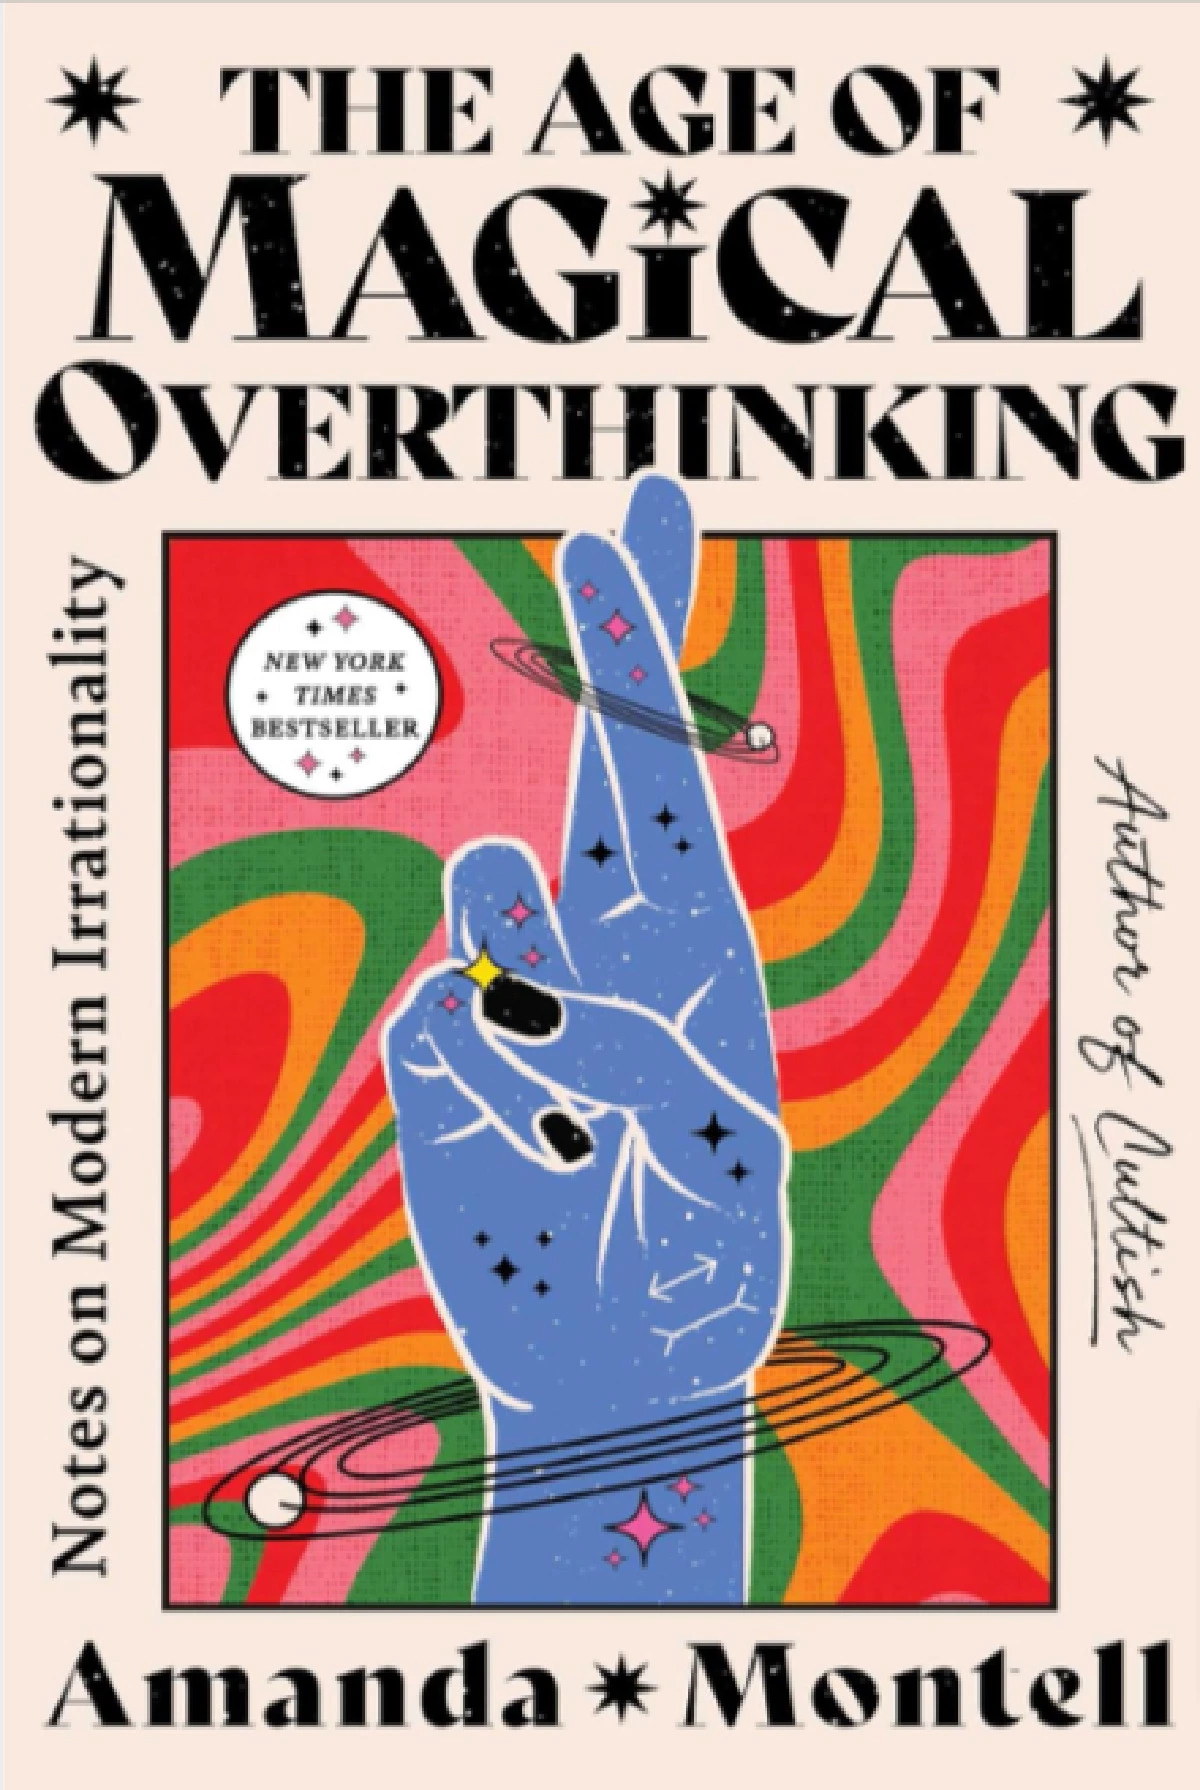 The Age of Magical Overthinking Book by Amanda Montell